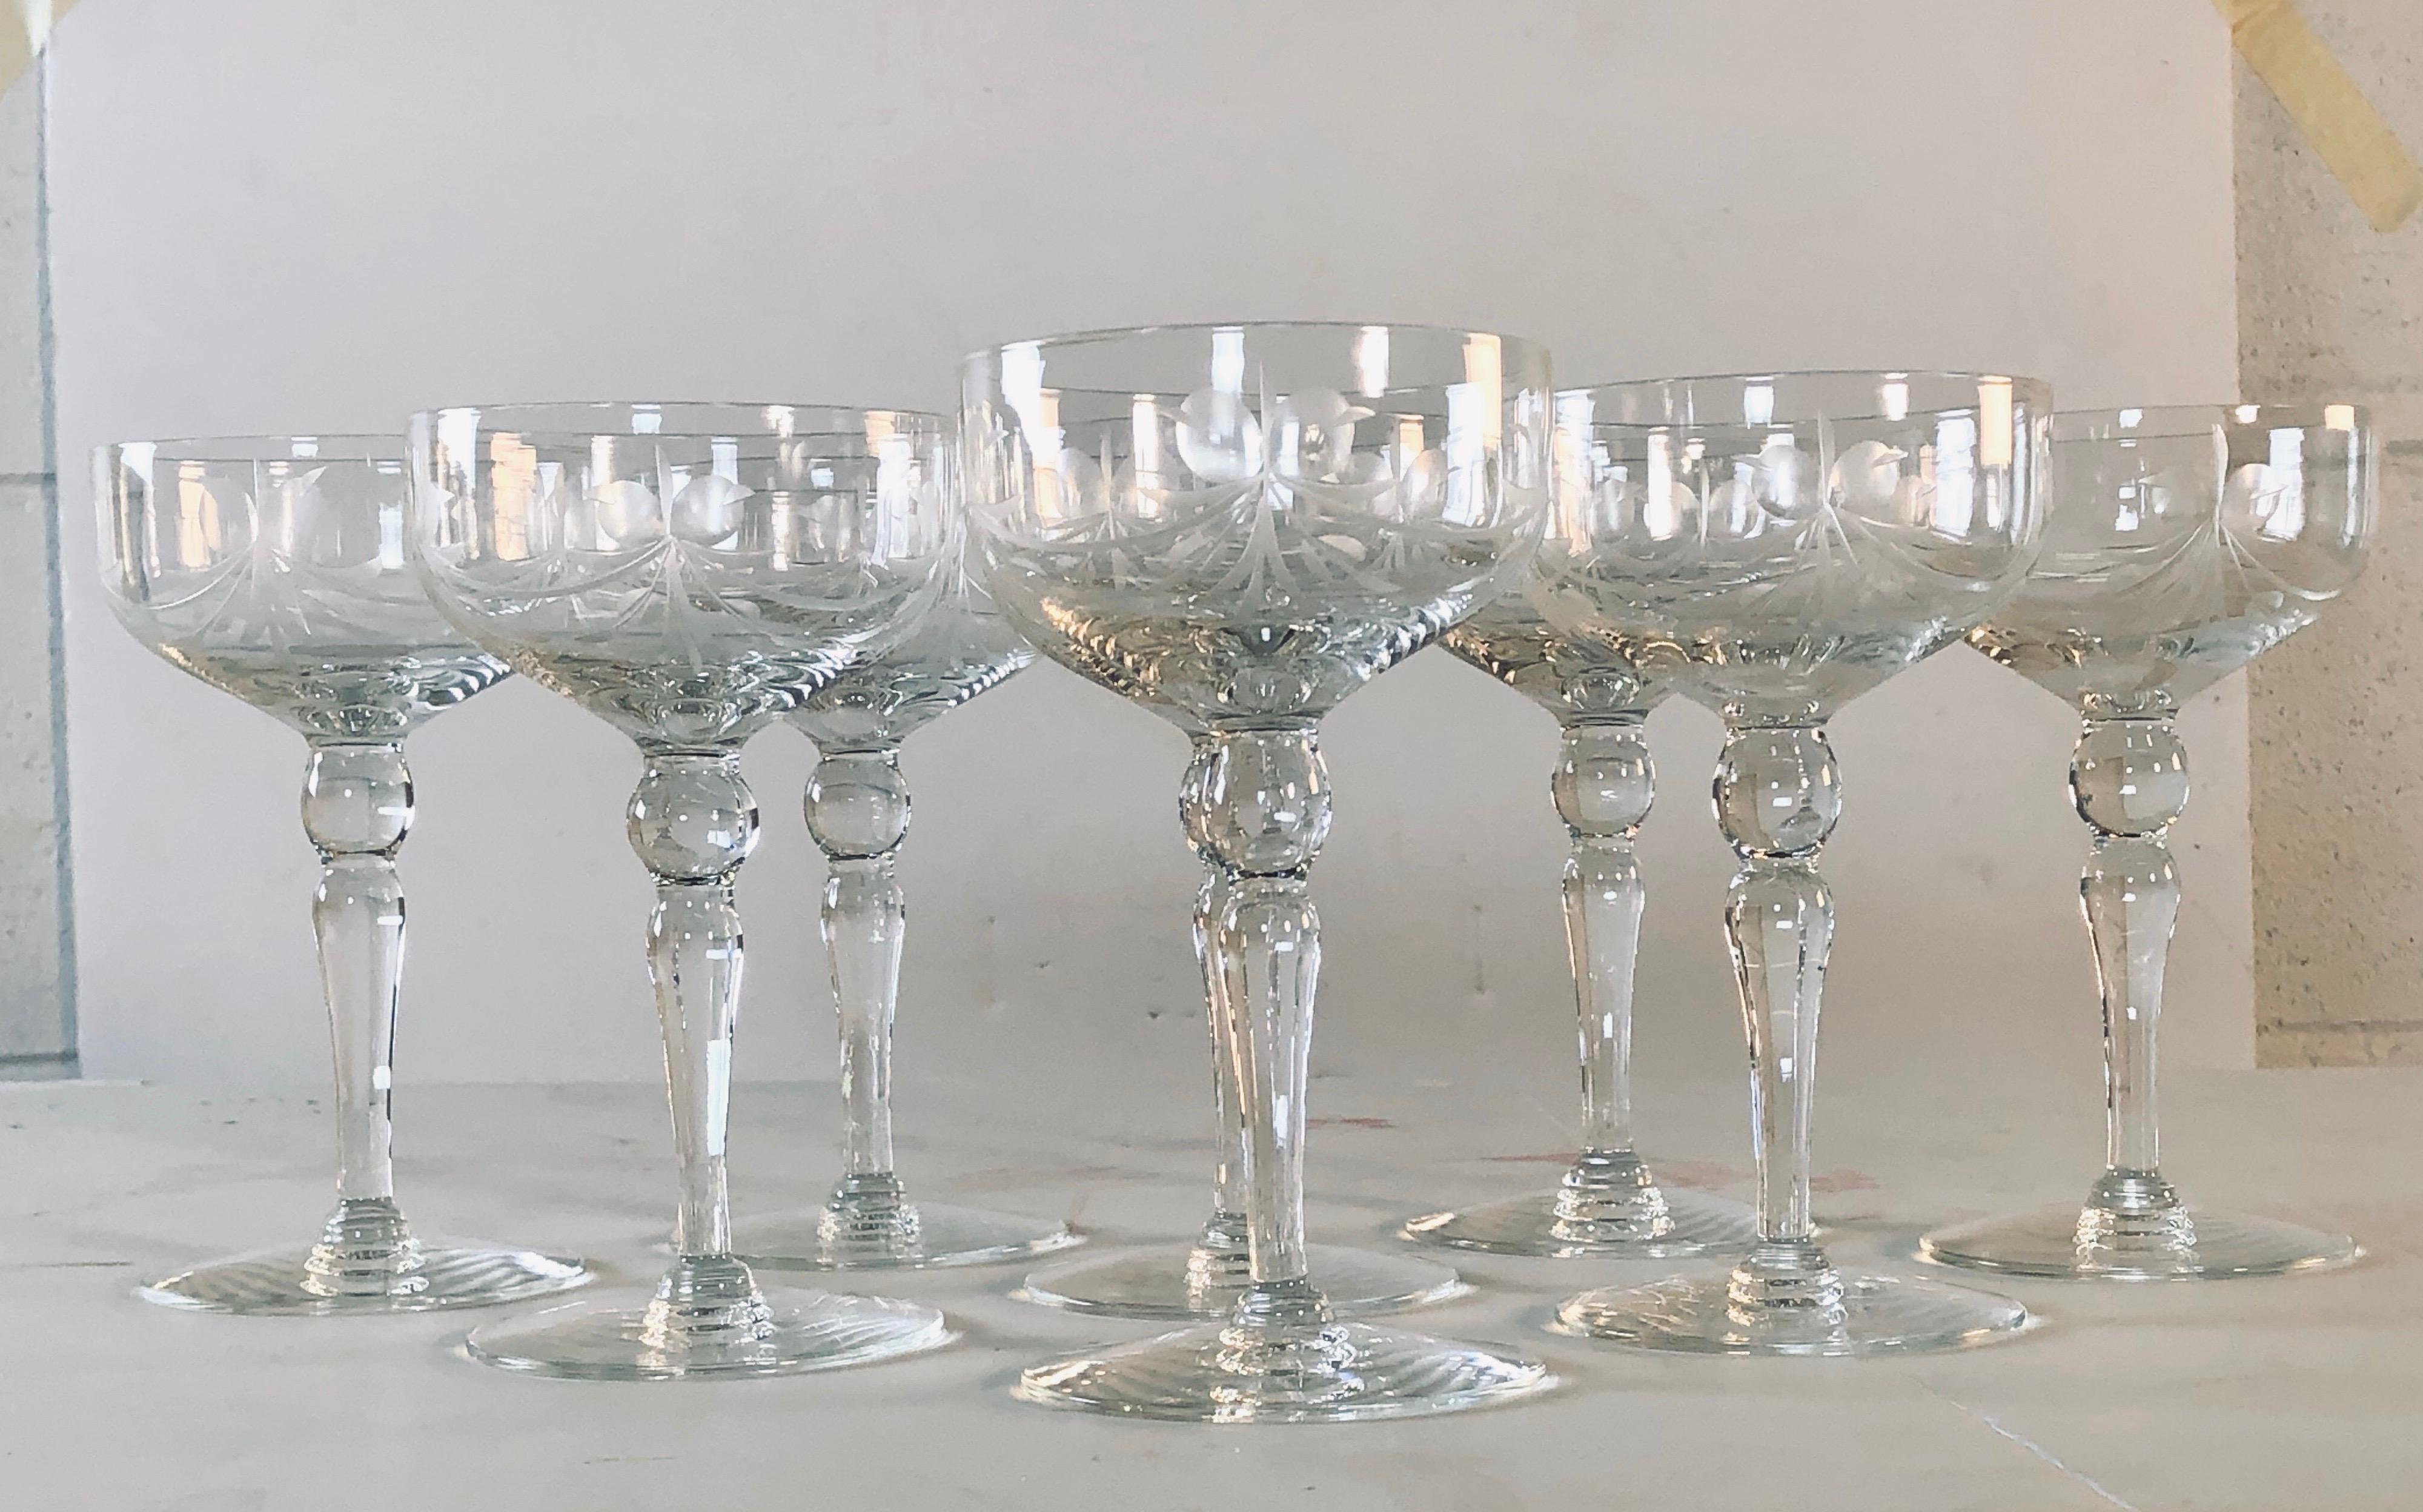 Vintage 1950s set of 8 glass coupes with an etched floral and bow tie design. No marks. Excellent condition.